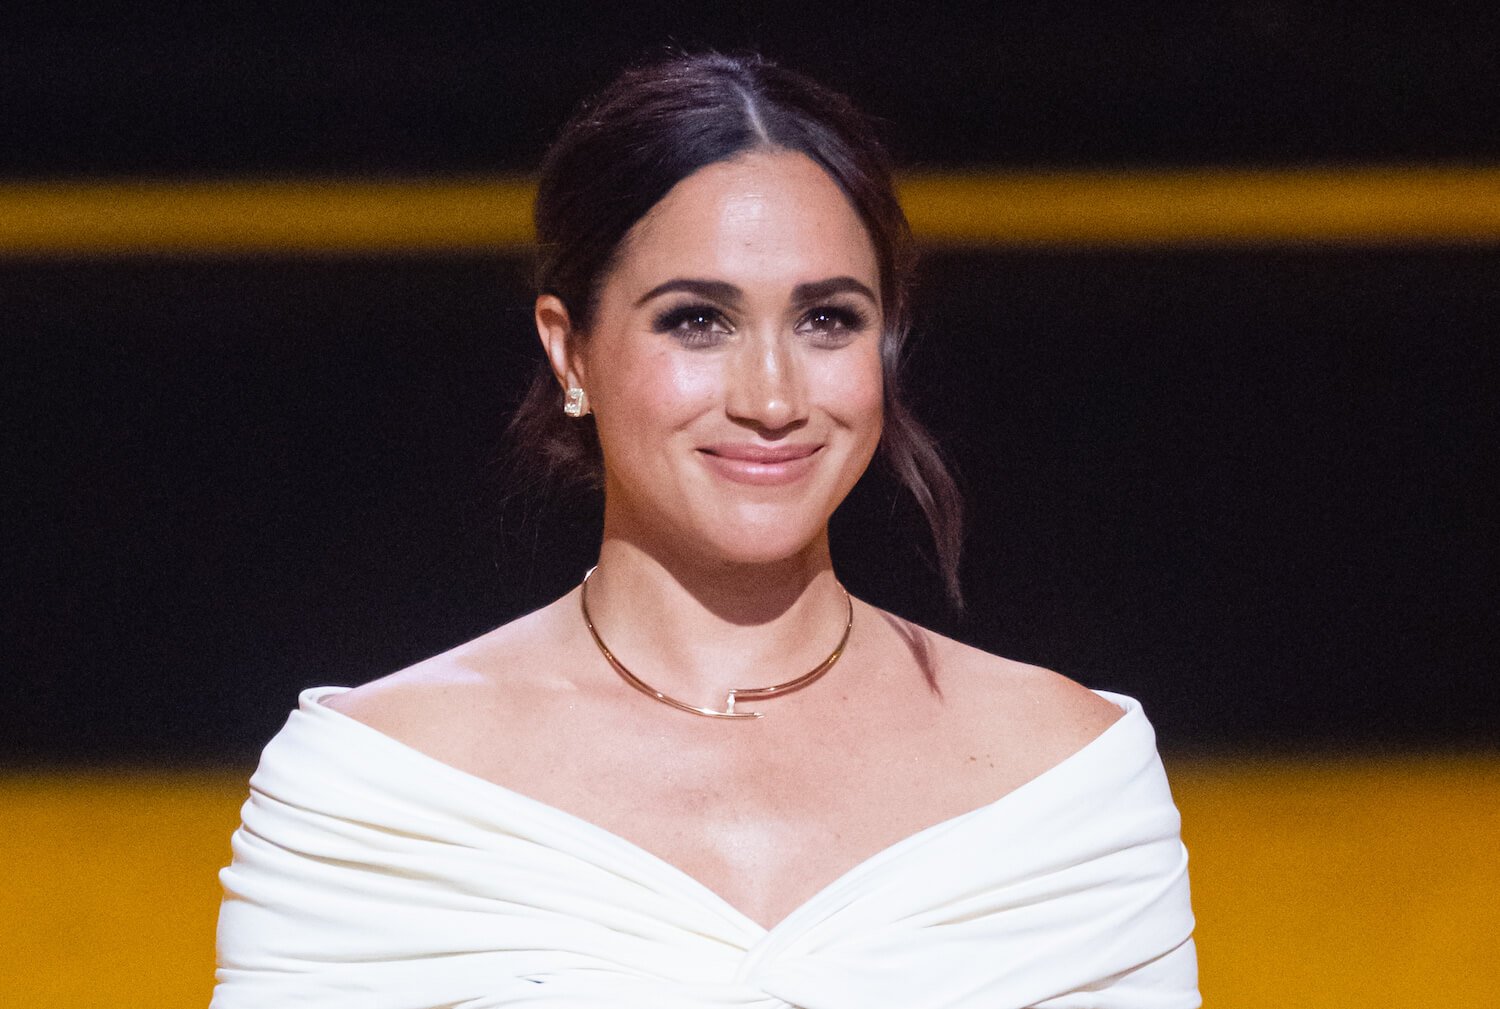 Meghan Markle smiles while wering a white off the shoulder top